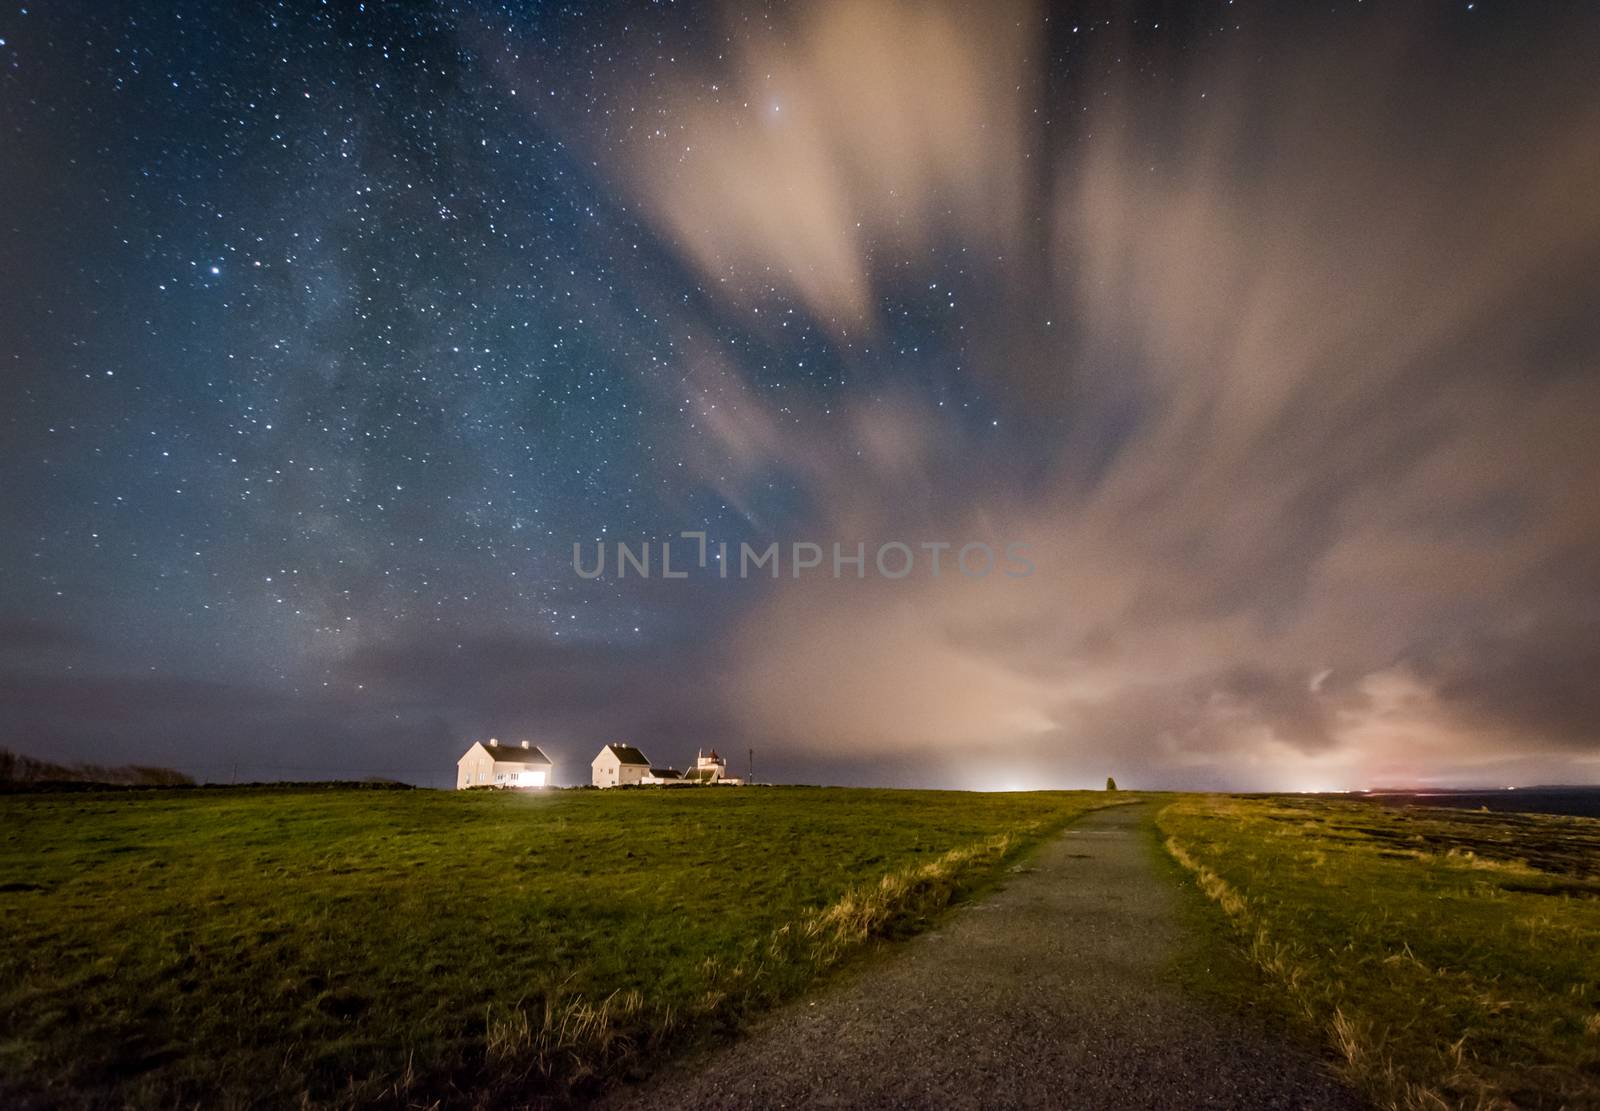 Milky way behind clouds over farm Norway